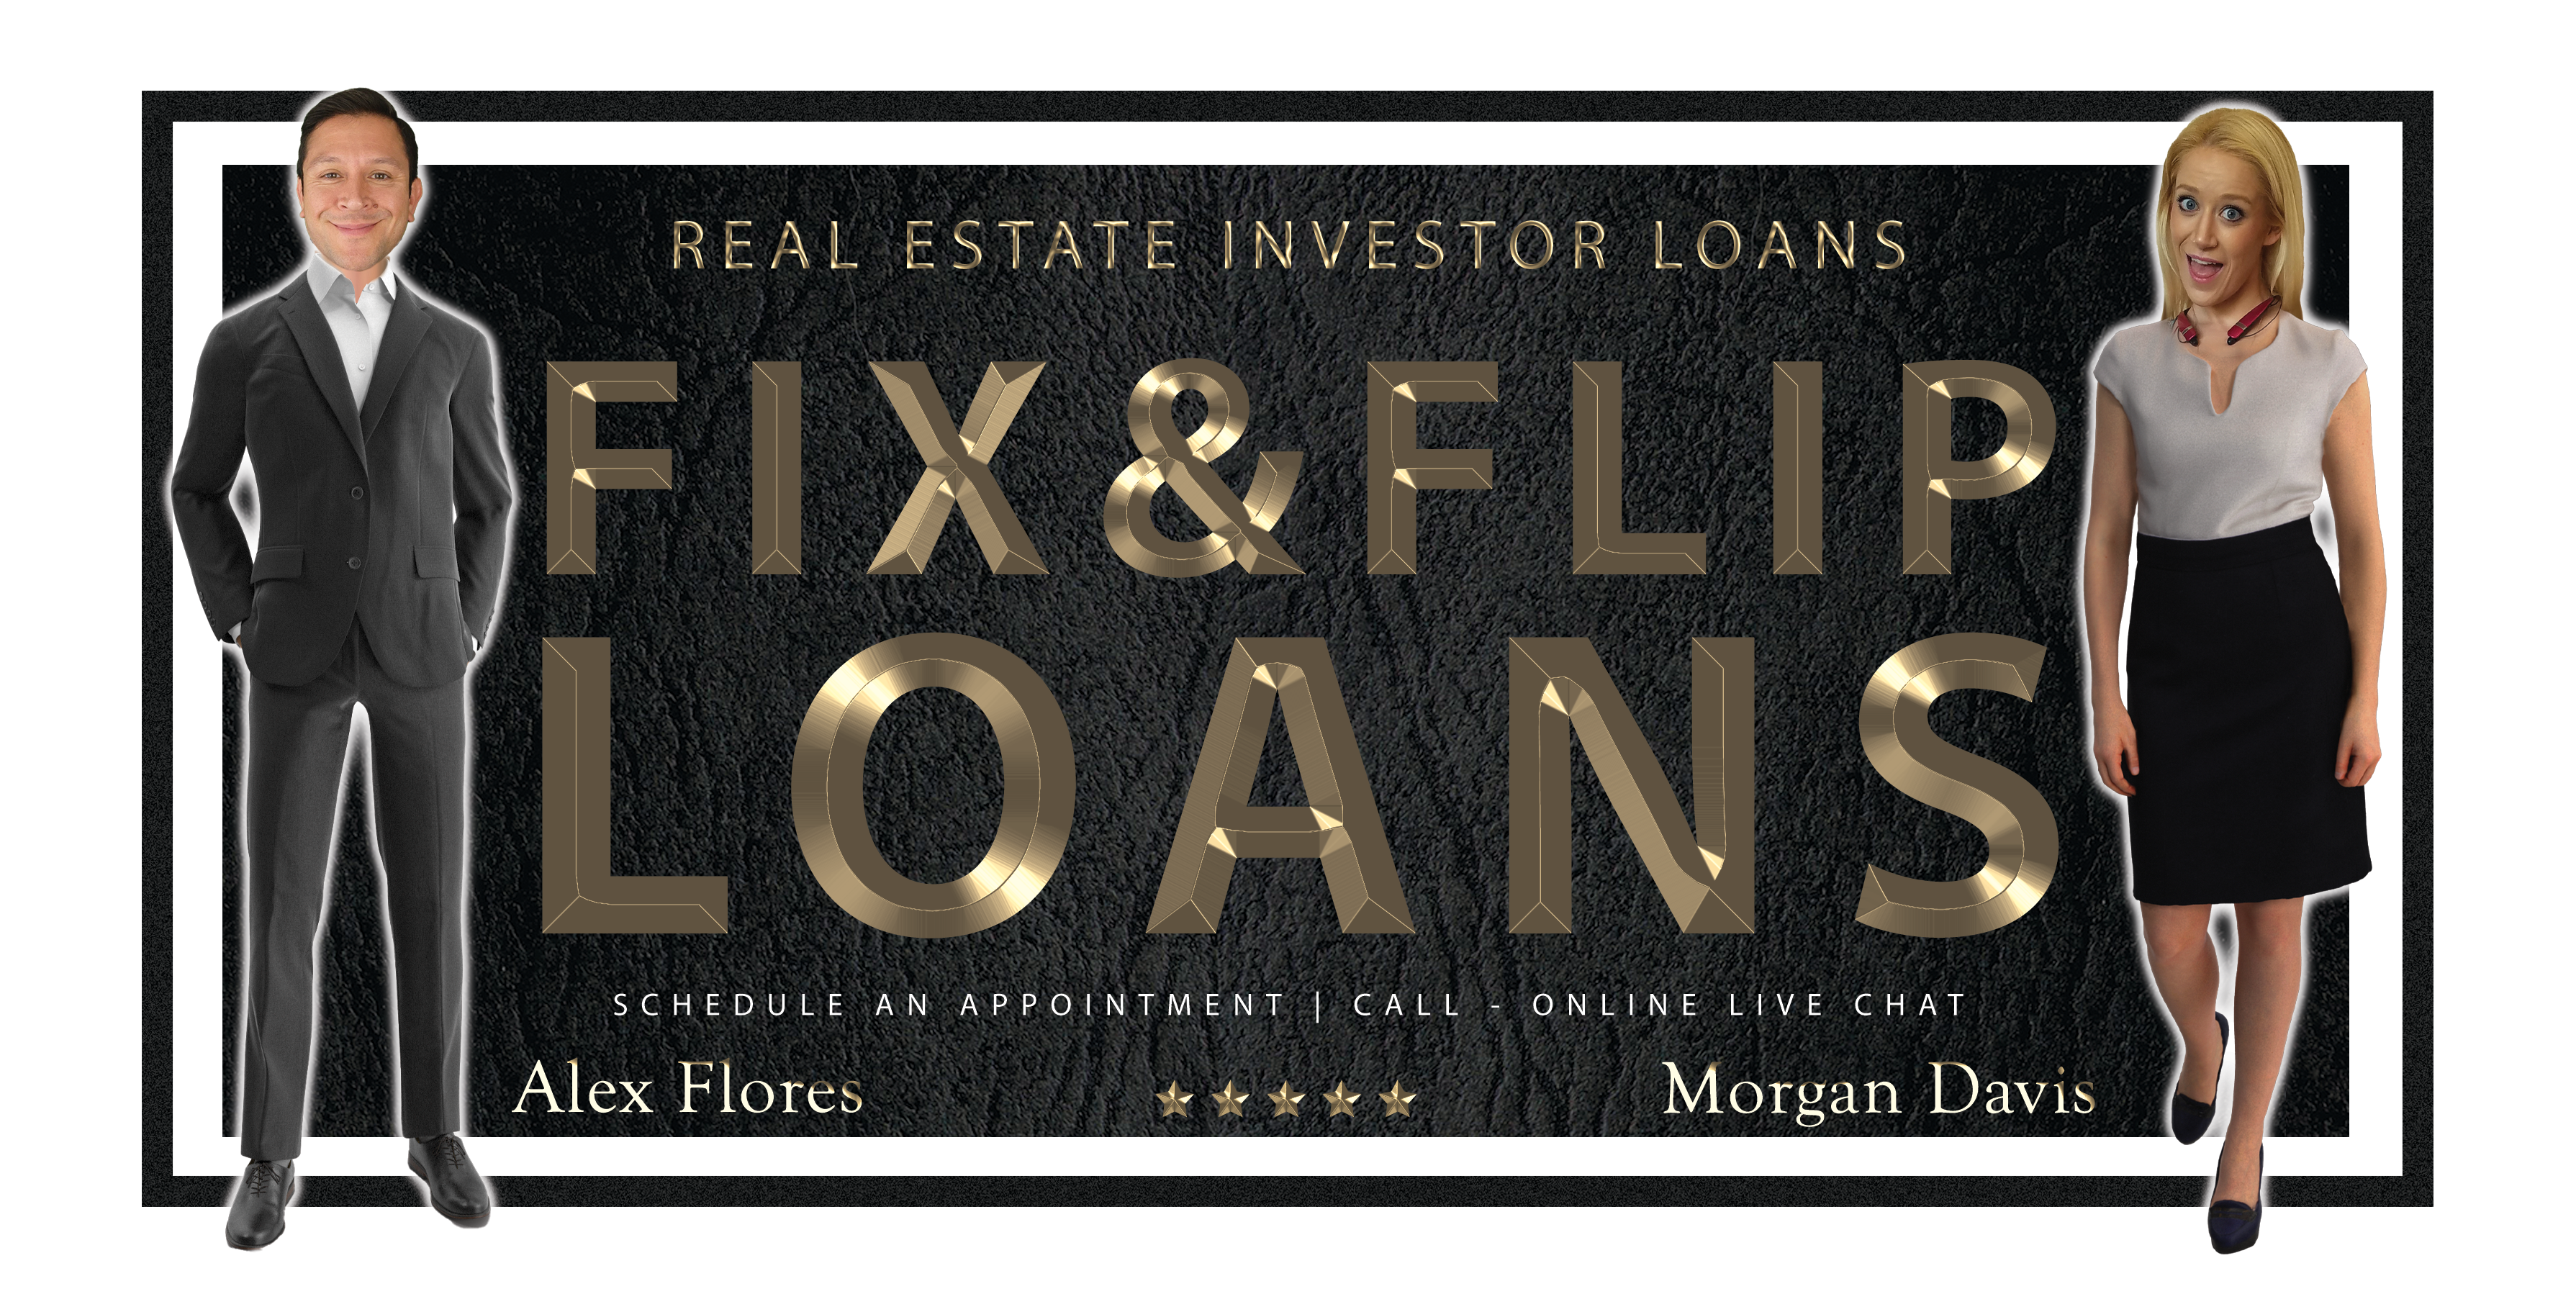 Fix & Flip Investor Loans for Real Estate investments in Houston Texas